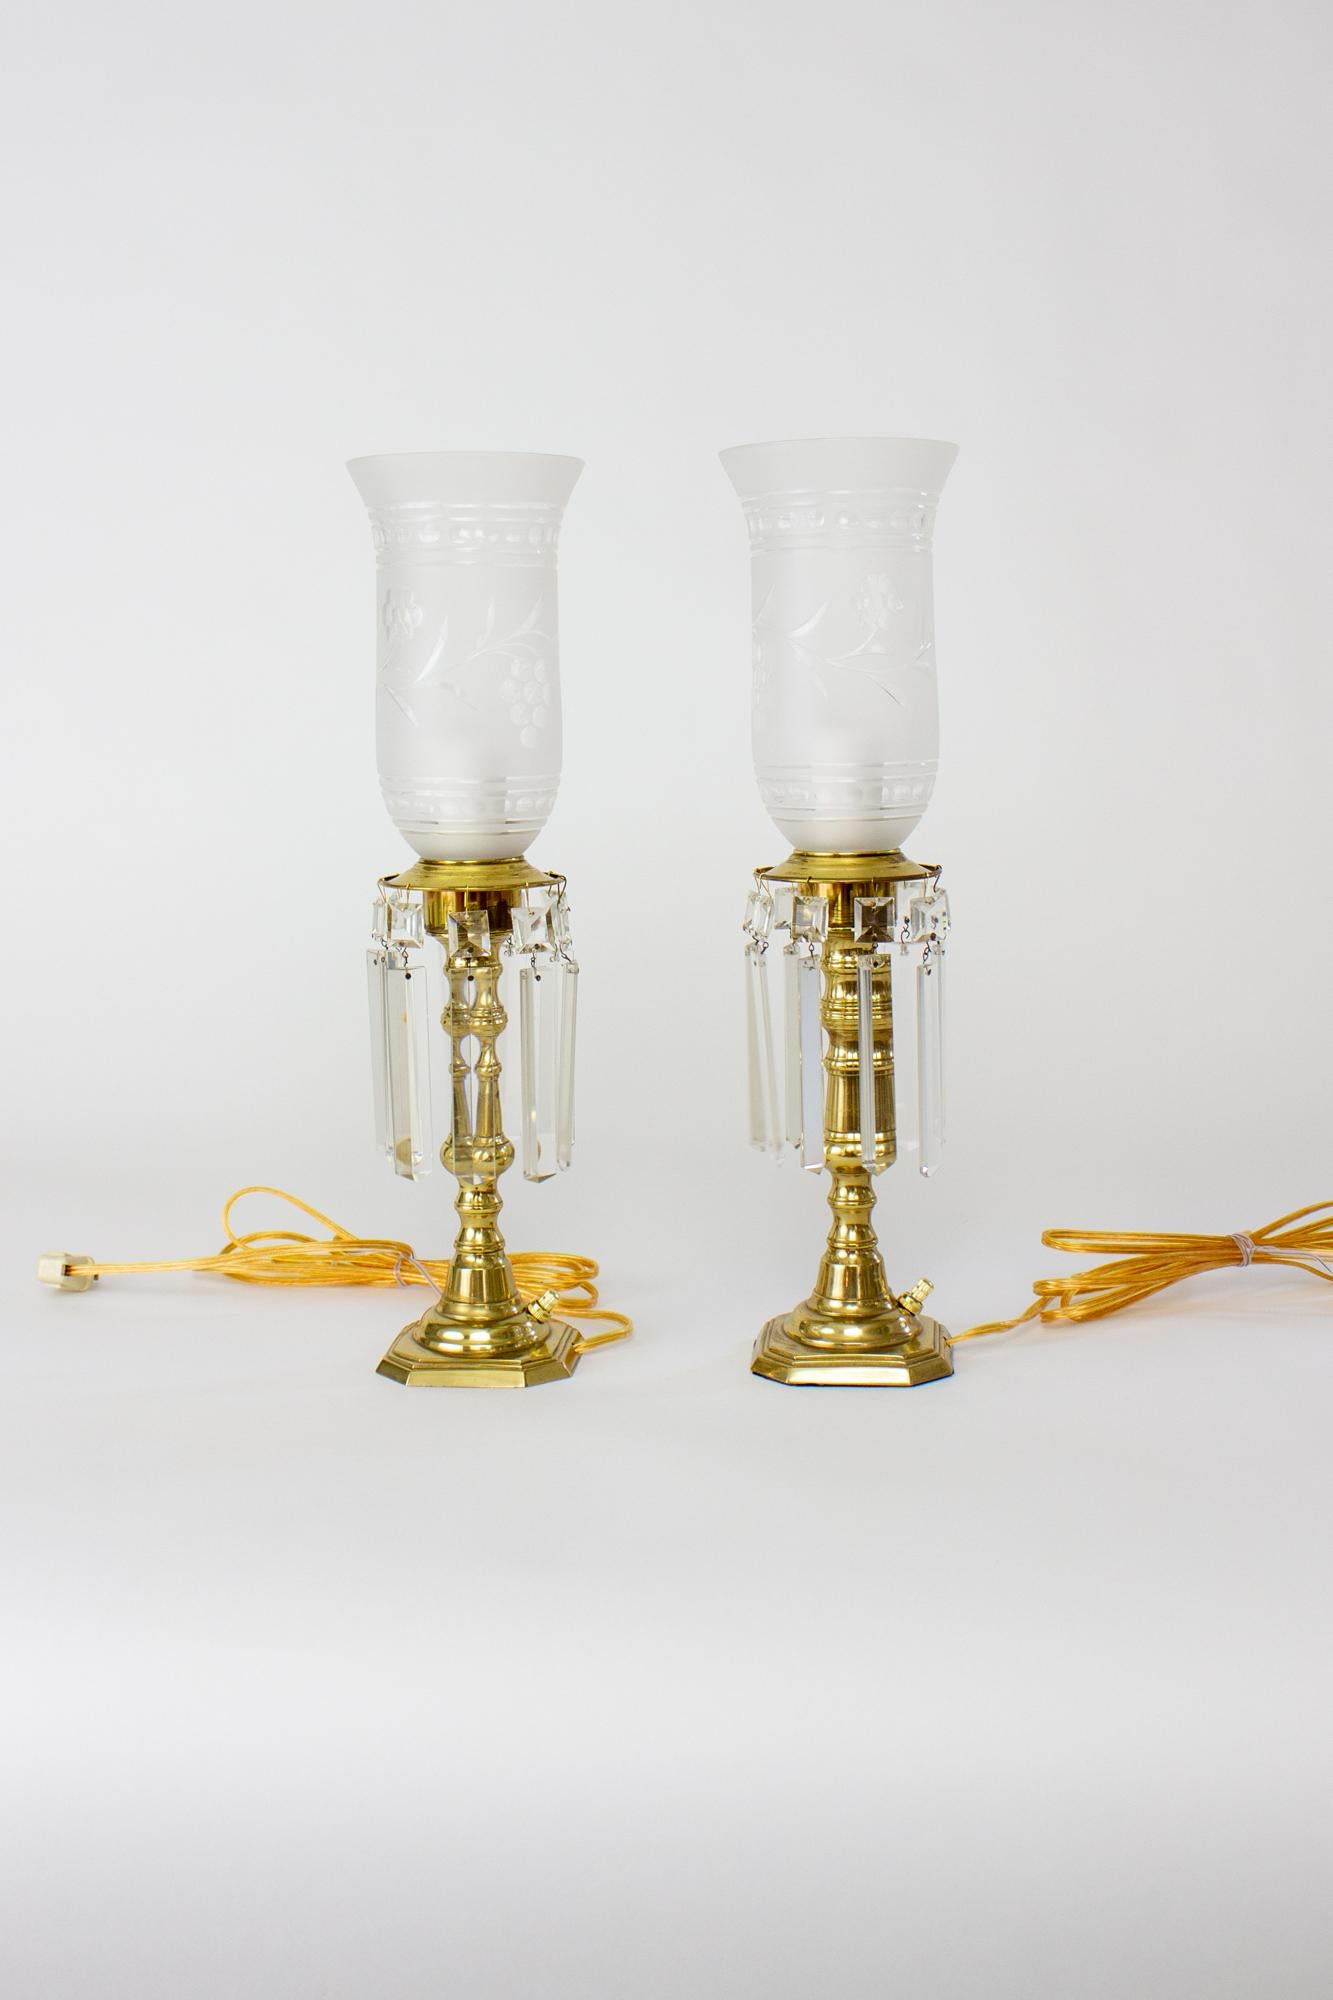 Brass hurricane lamps with crystals. Solid brass cut square bases rising up in a round stepped stem to a candle cup ringed with crystals. The crystals are a squared colonial cut. Glass shades are frosted cut glass rising up in a traditional